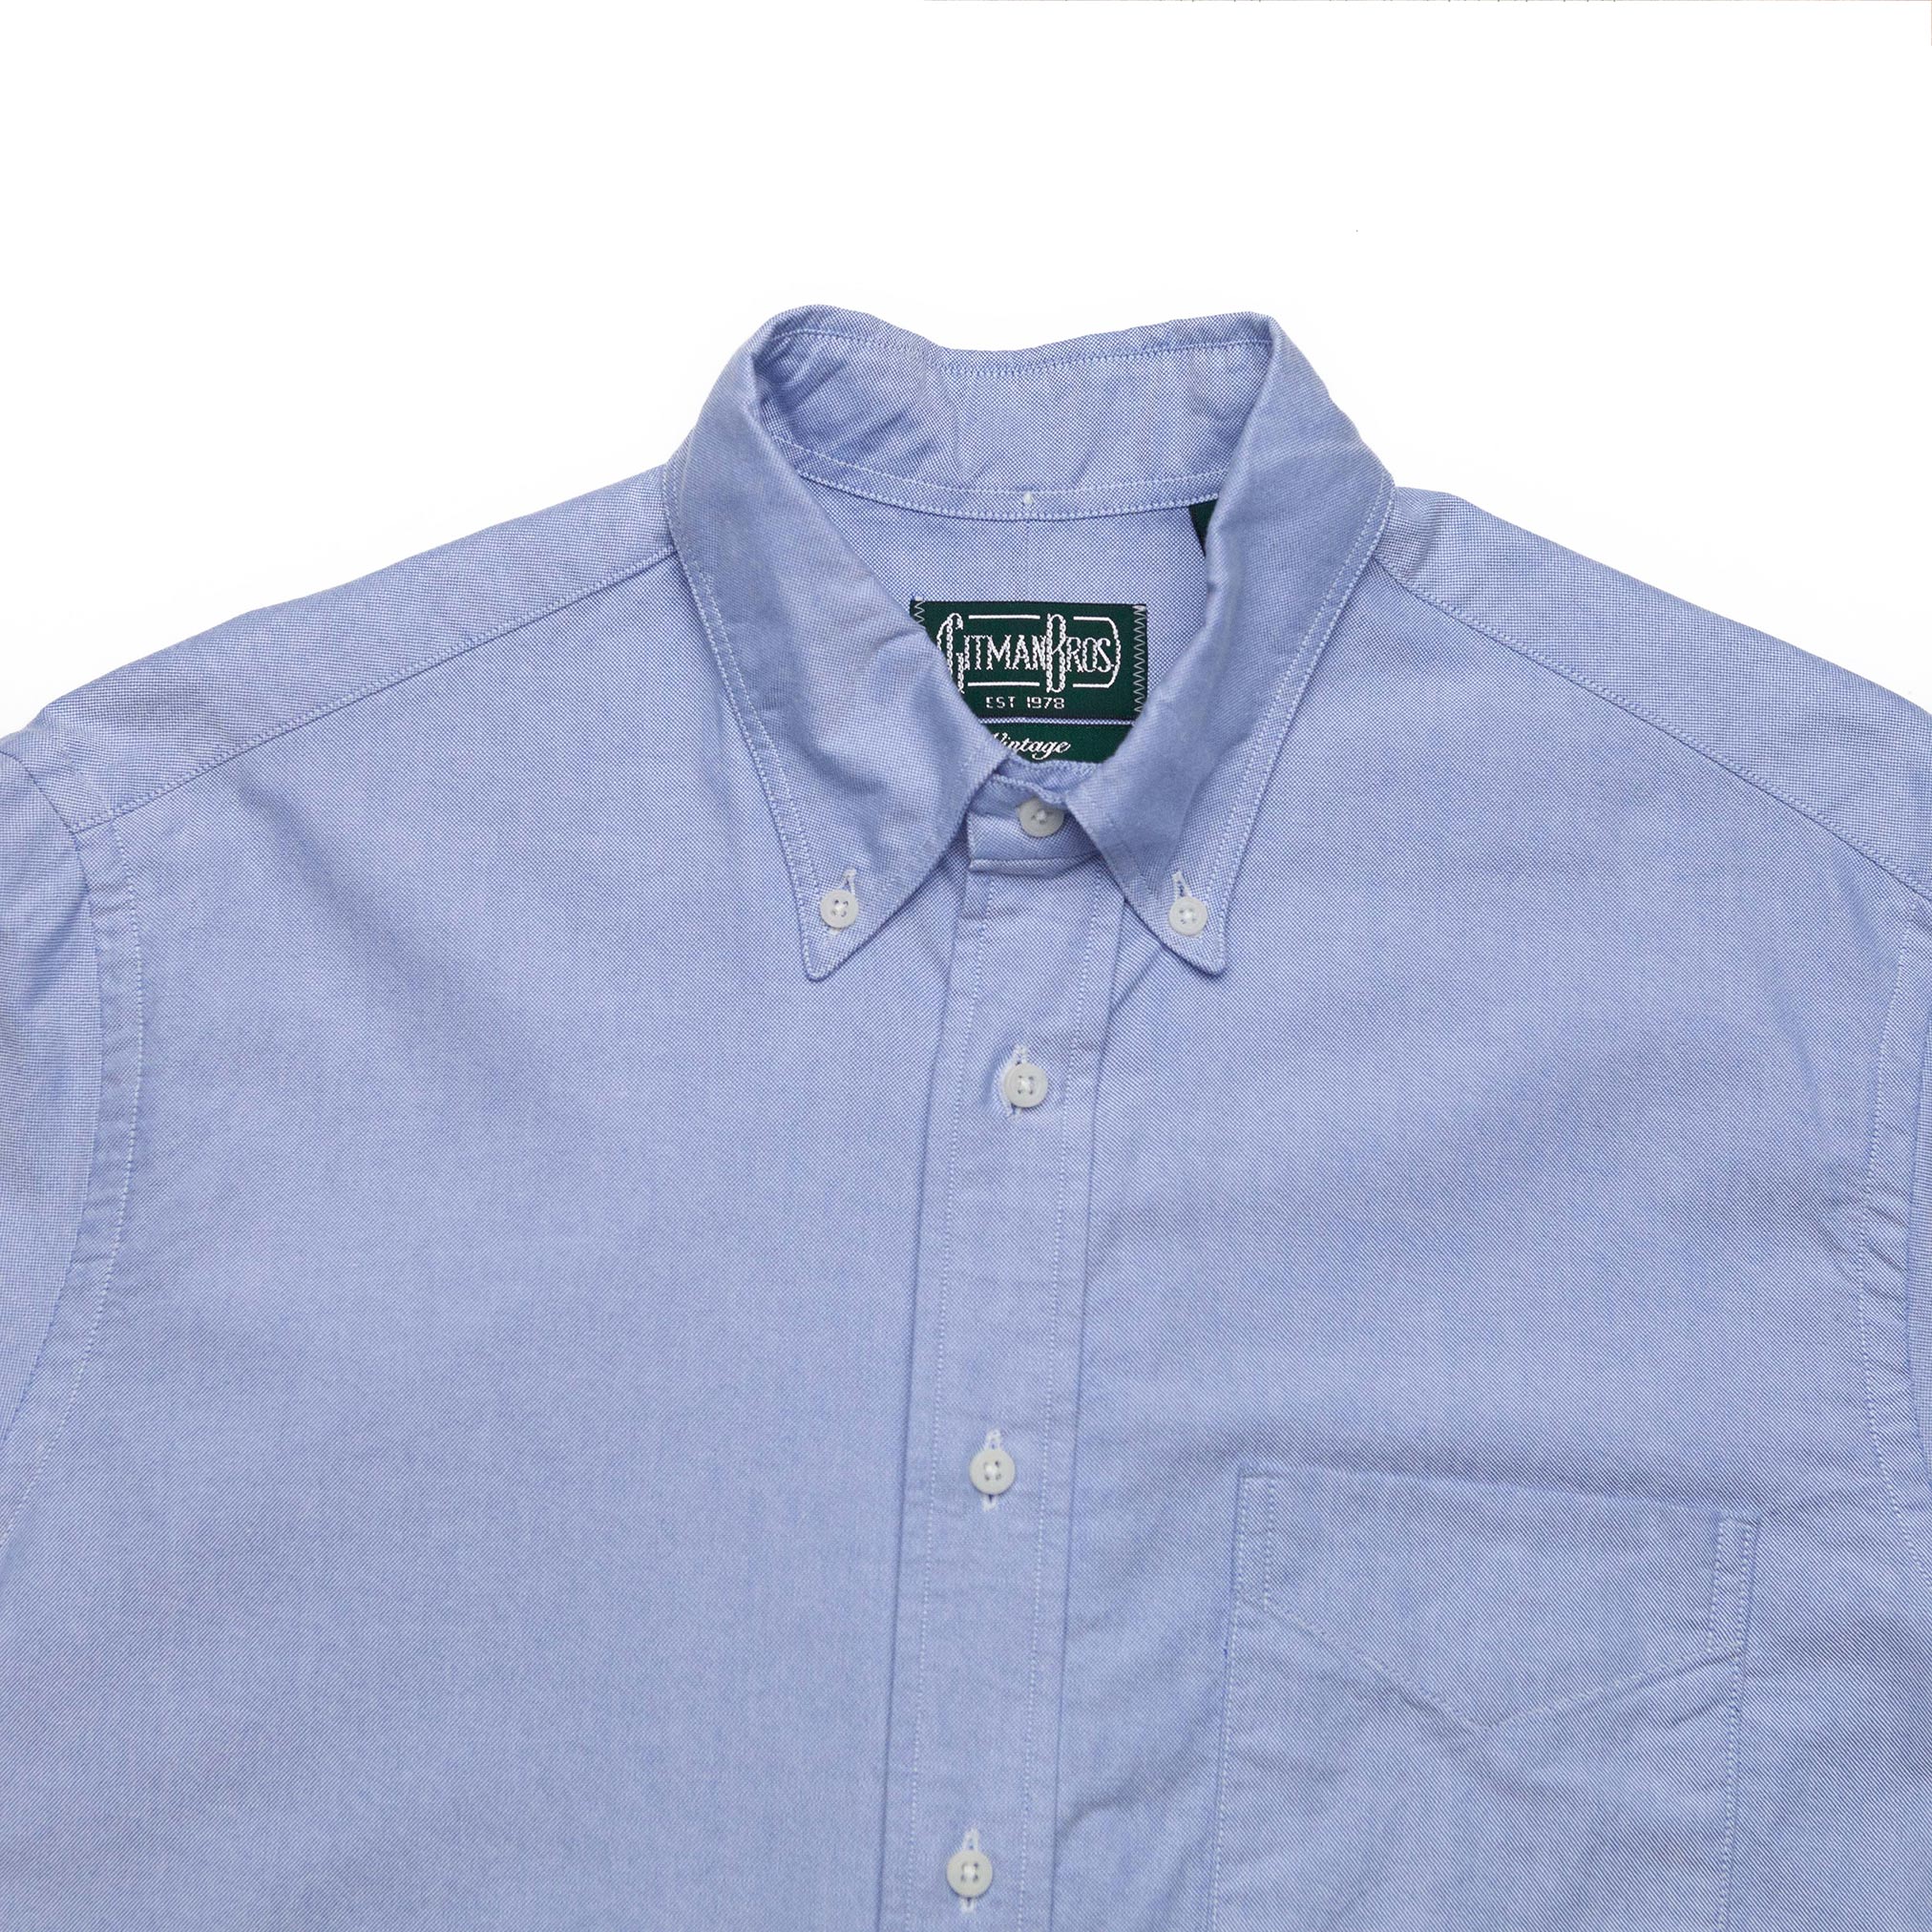 The Blue Oxford